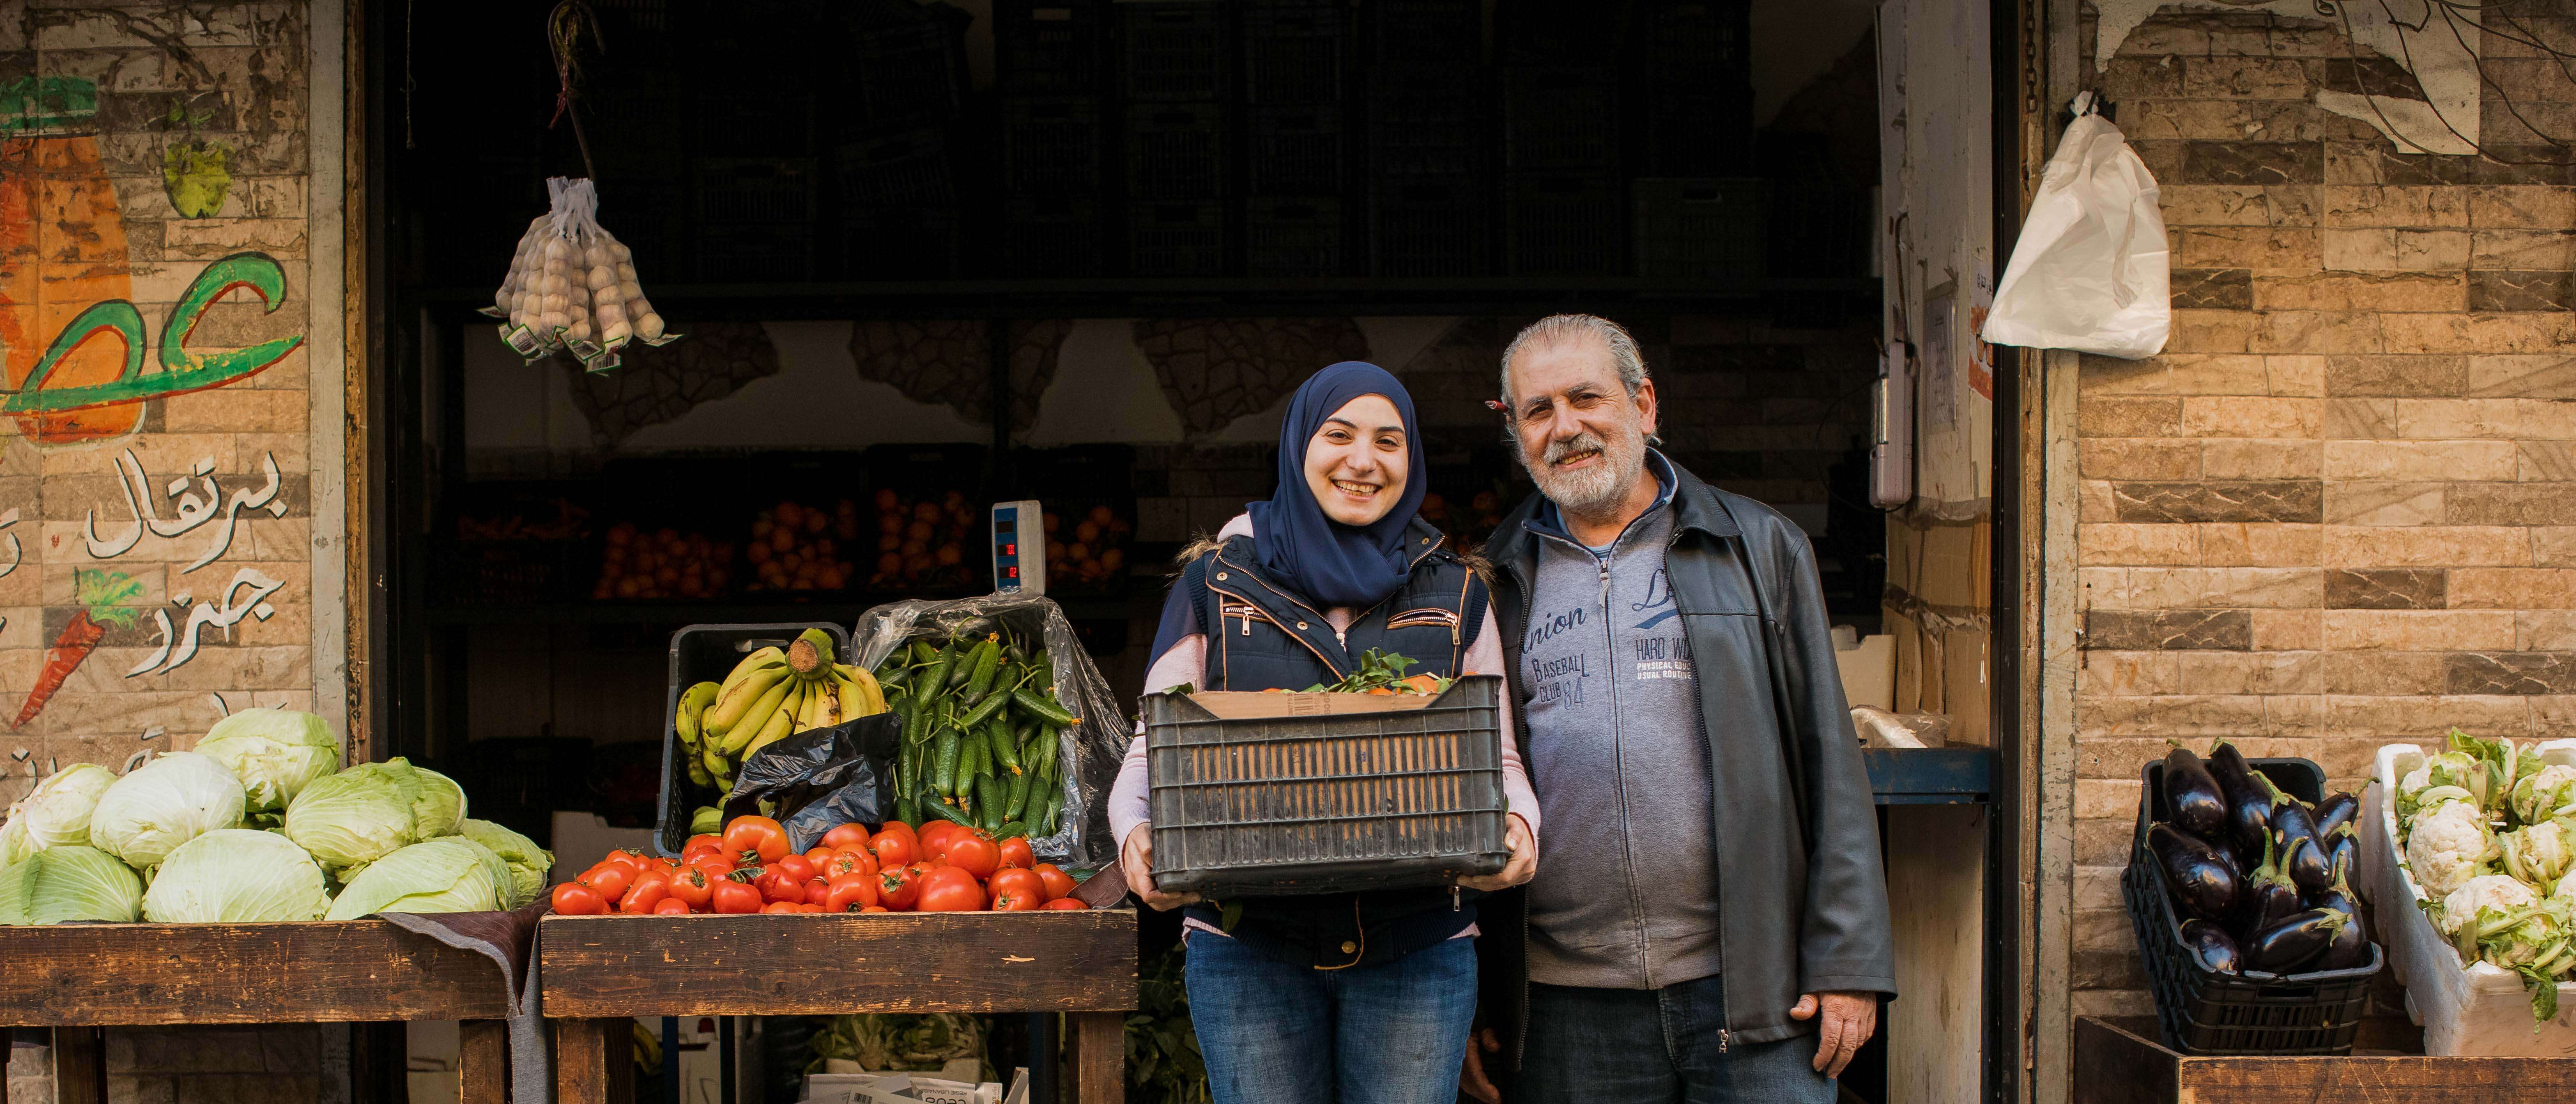 A daughter and father poses for a photo outside of their shop in Lebanon.